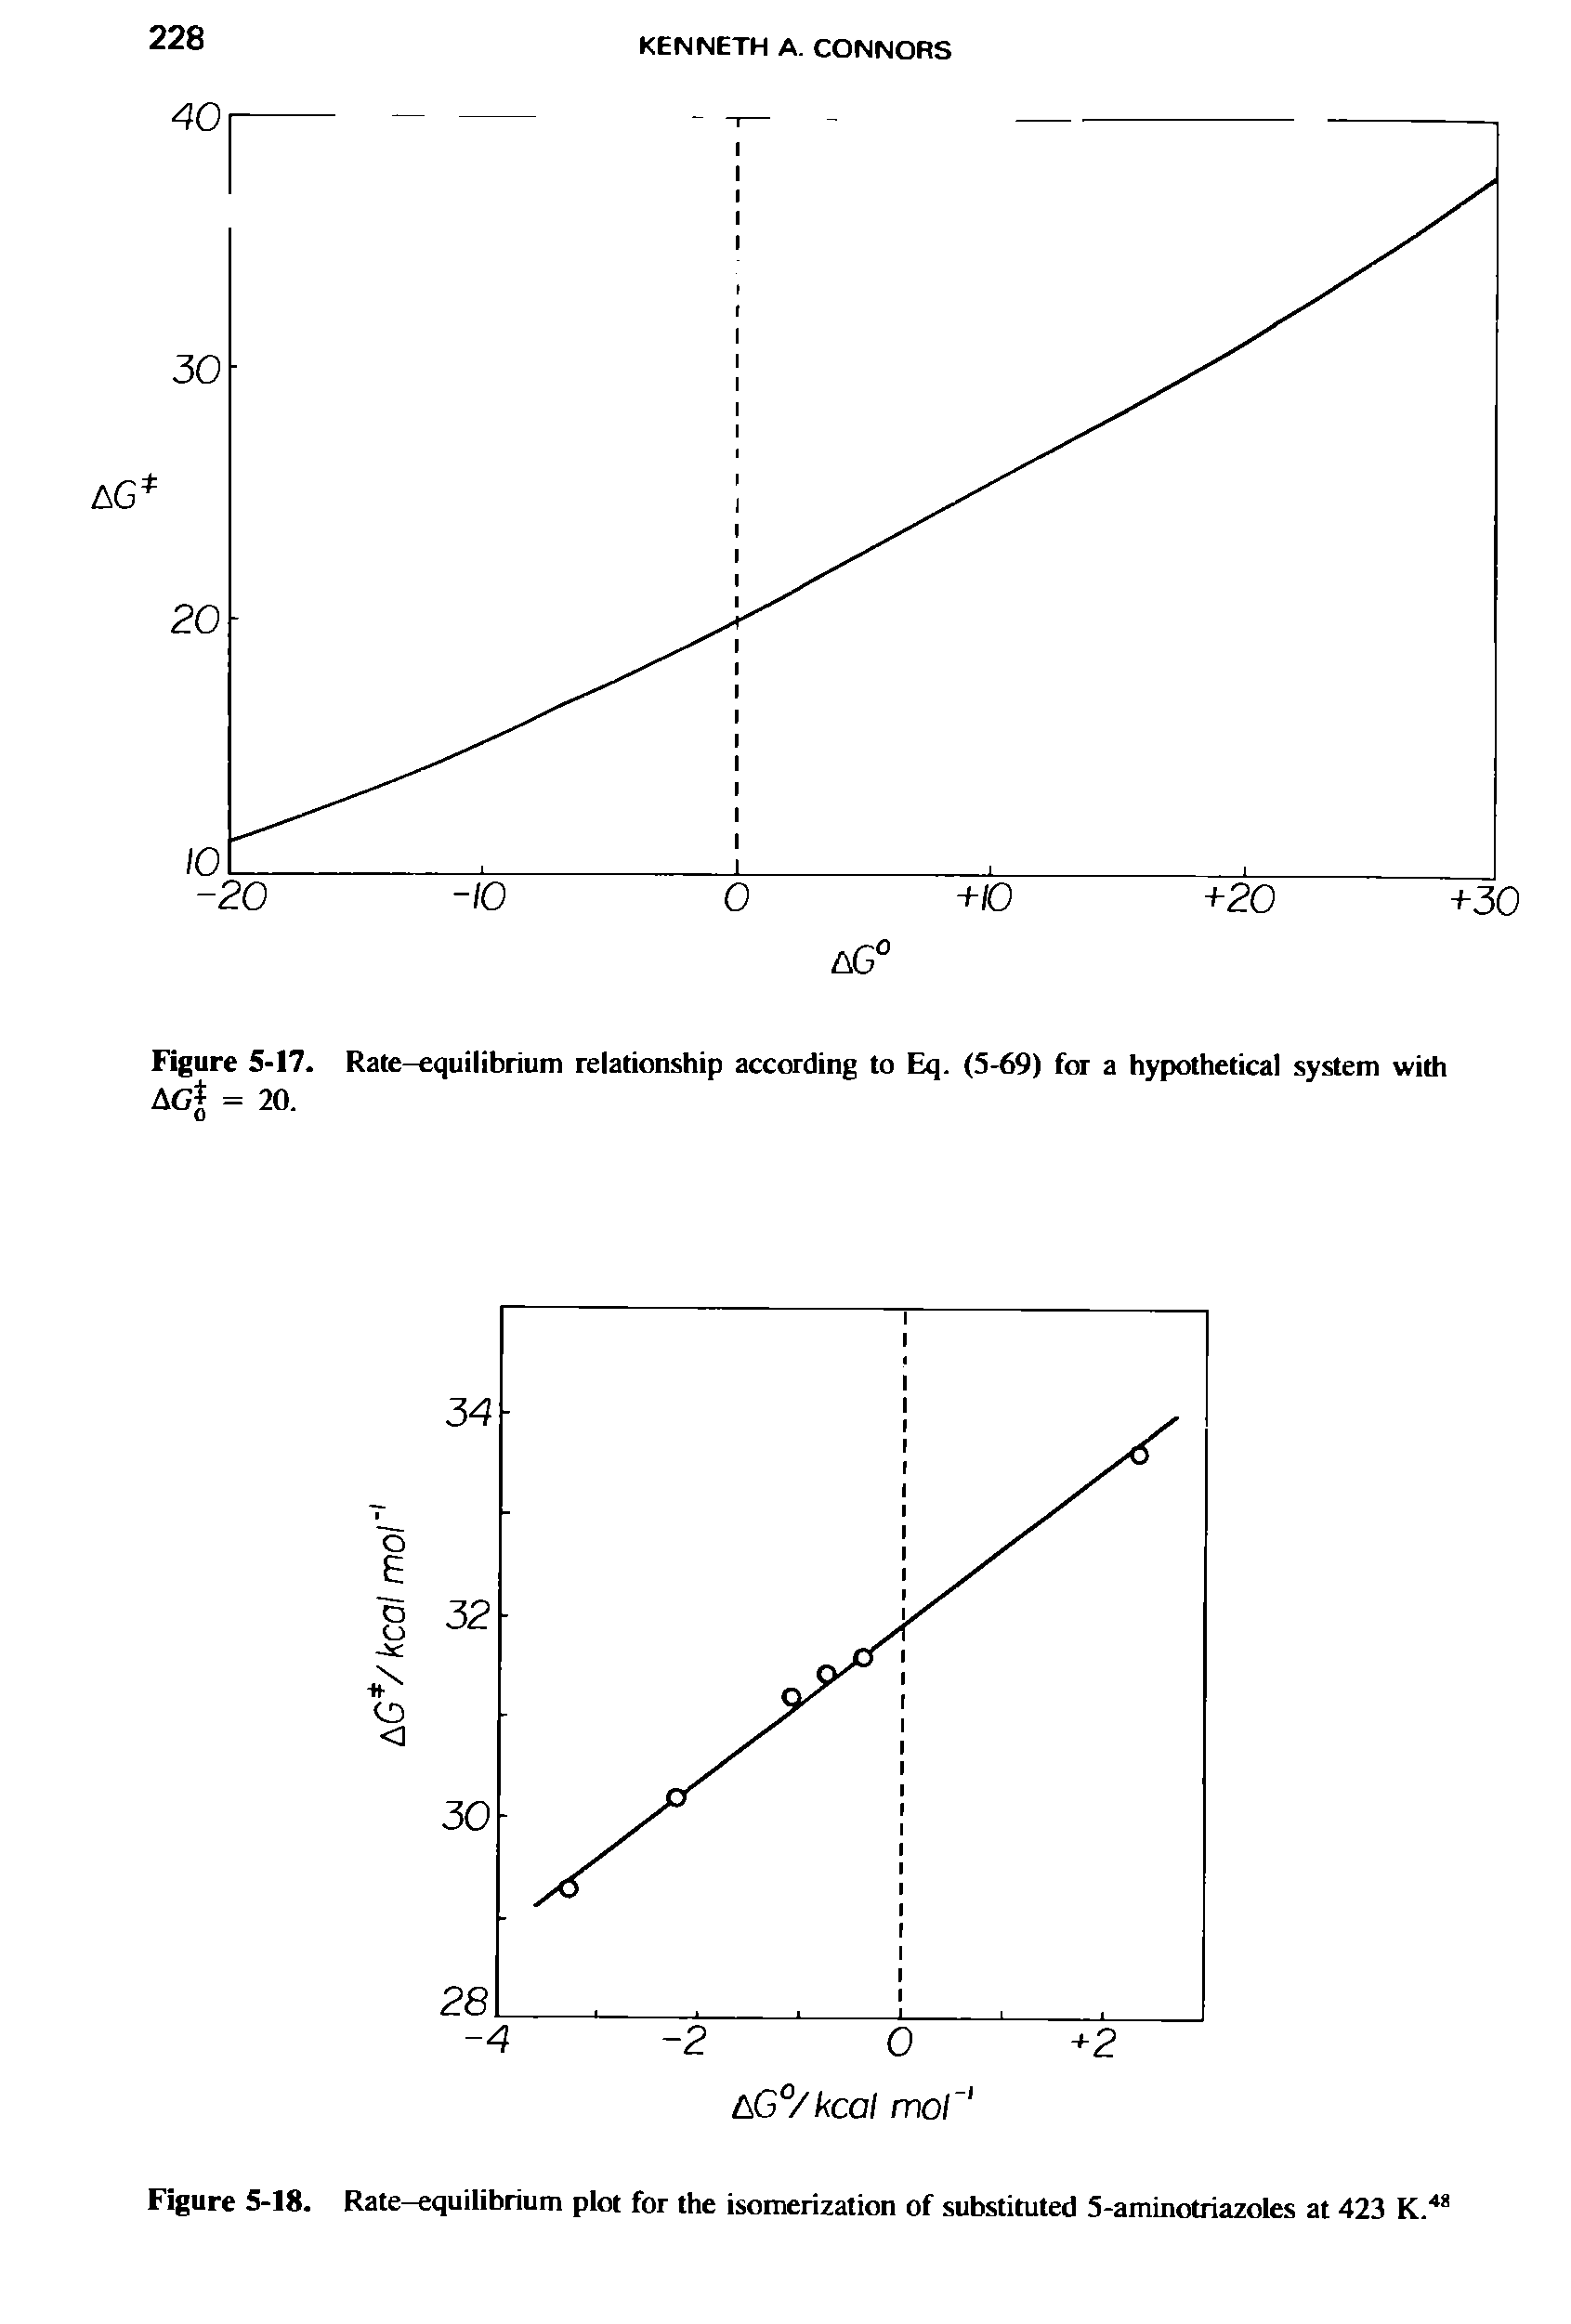 Figure 5-17. Rate-equilibrium relationship according to Eq. (5-69) for a hypothetical system with AG = 20.